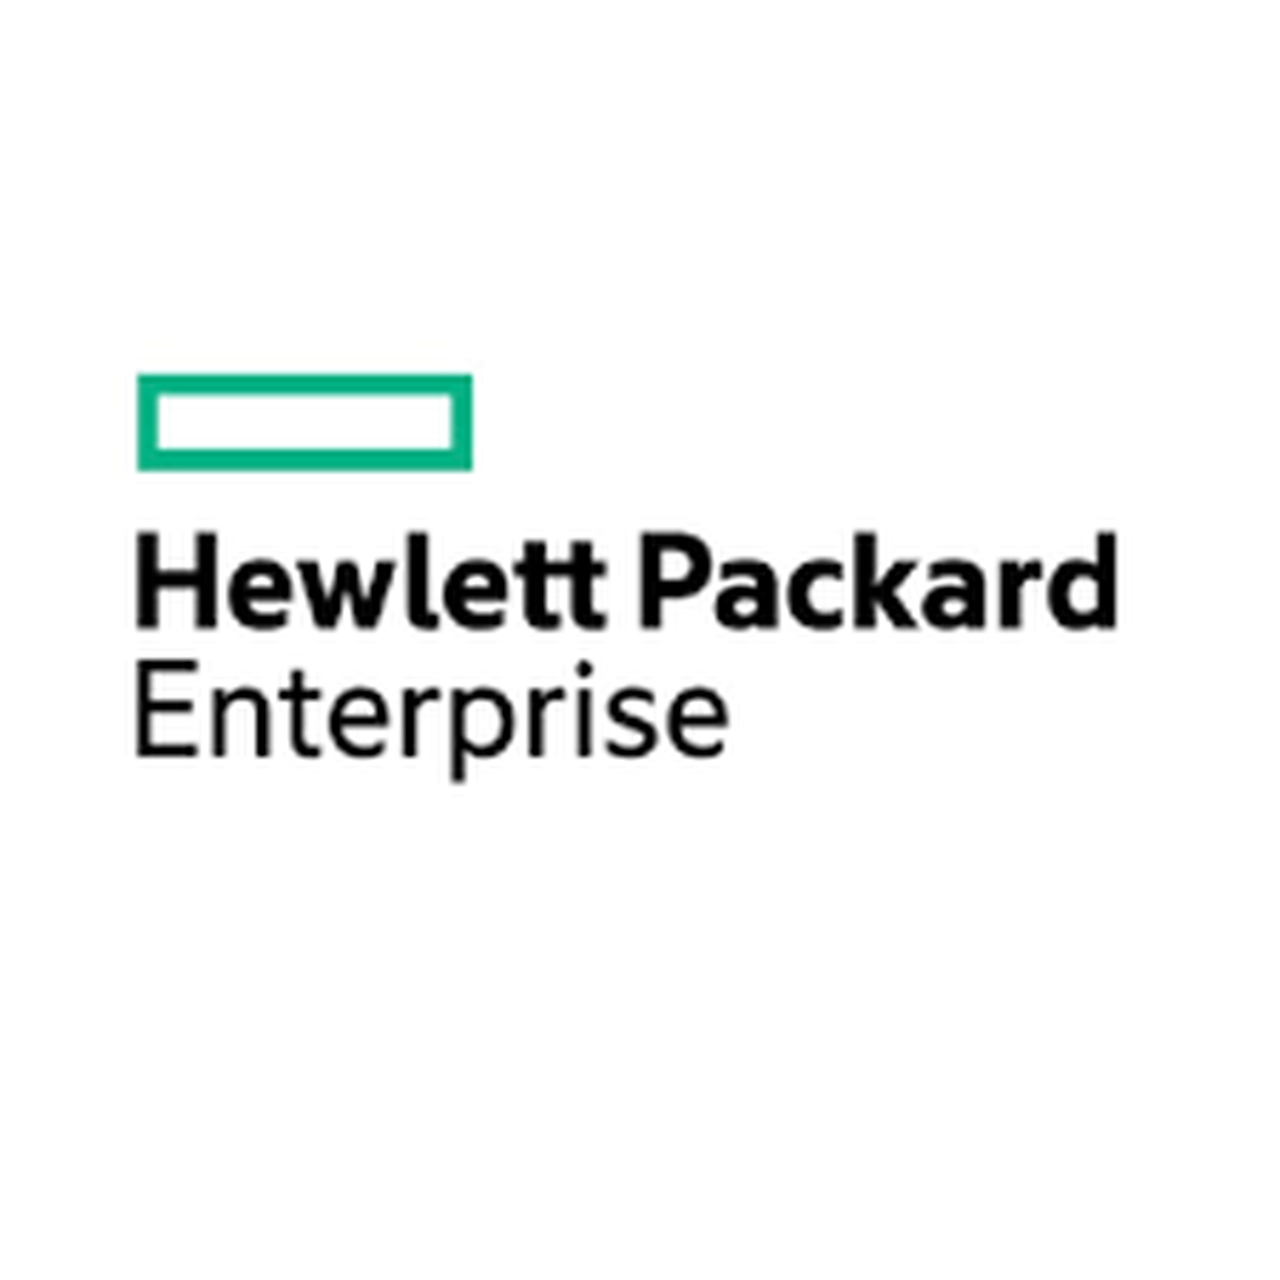 HPE Education Found Basic extnsion (ind) Training